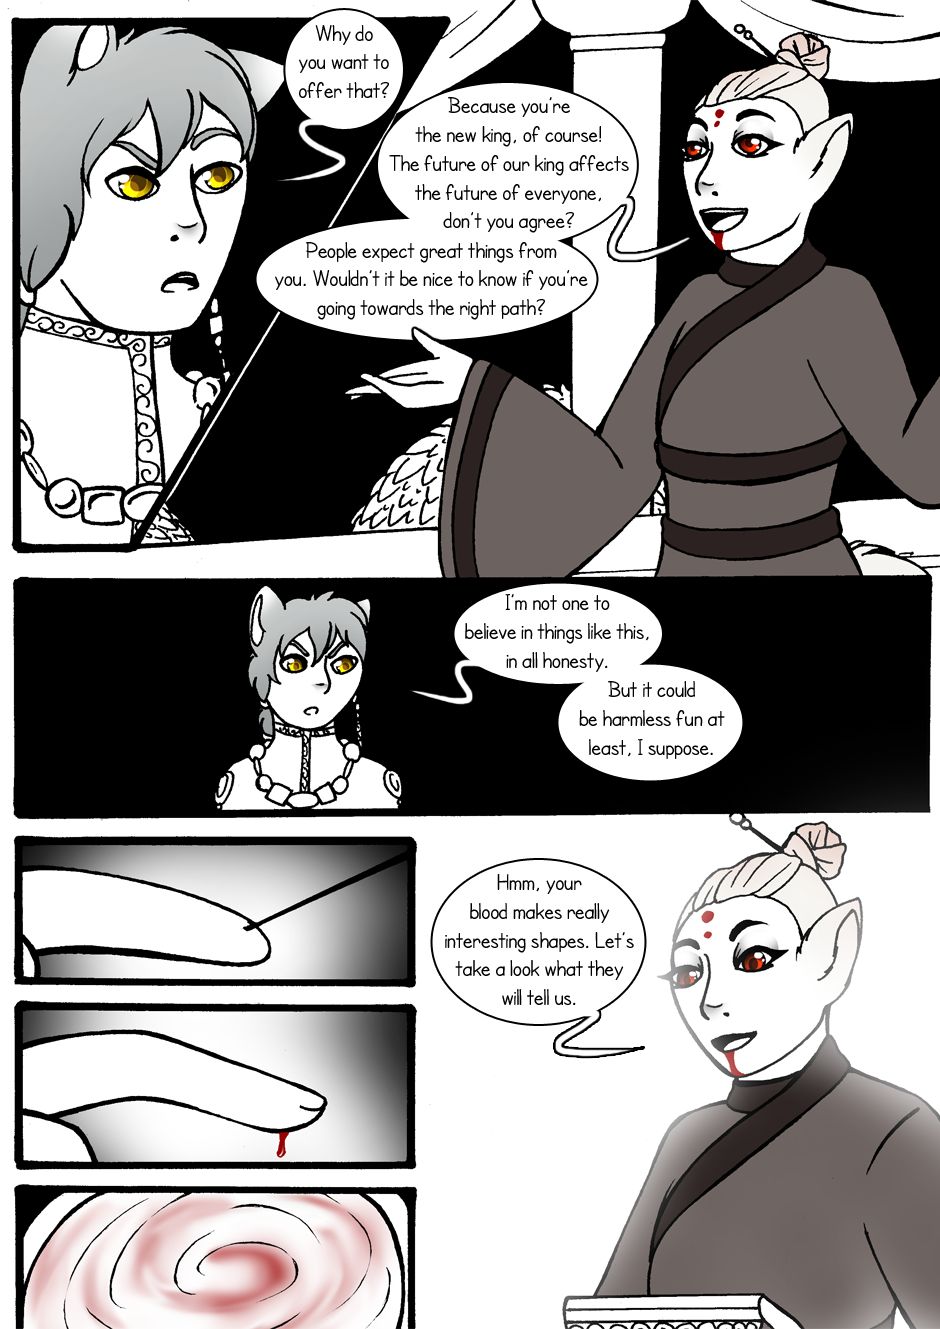 [Jeny-jen94] Between Kings and Queens [Ongoing] 26